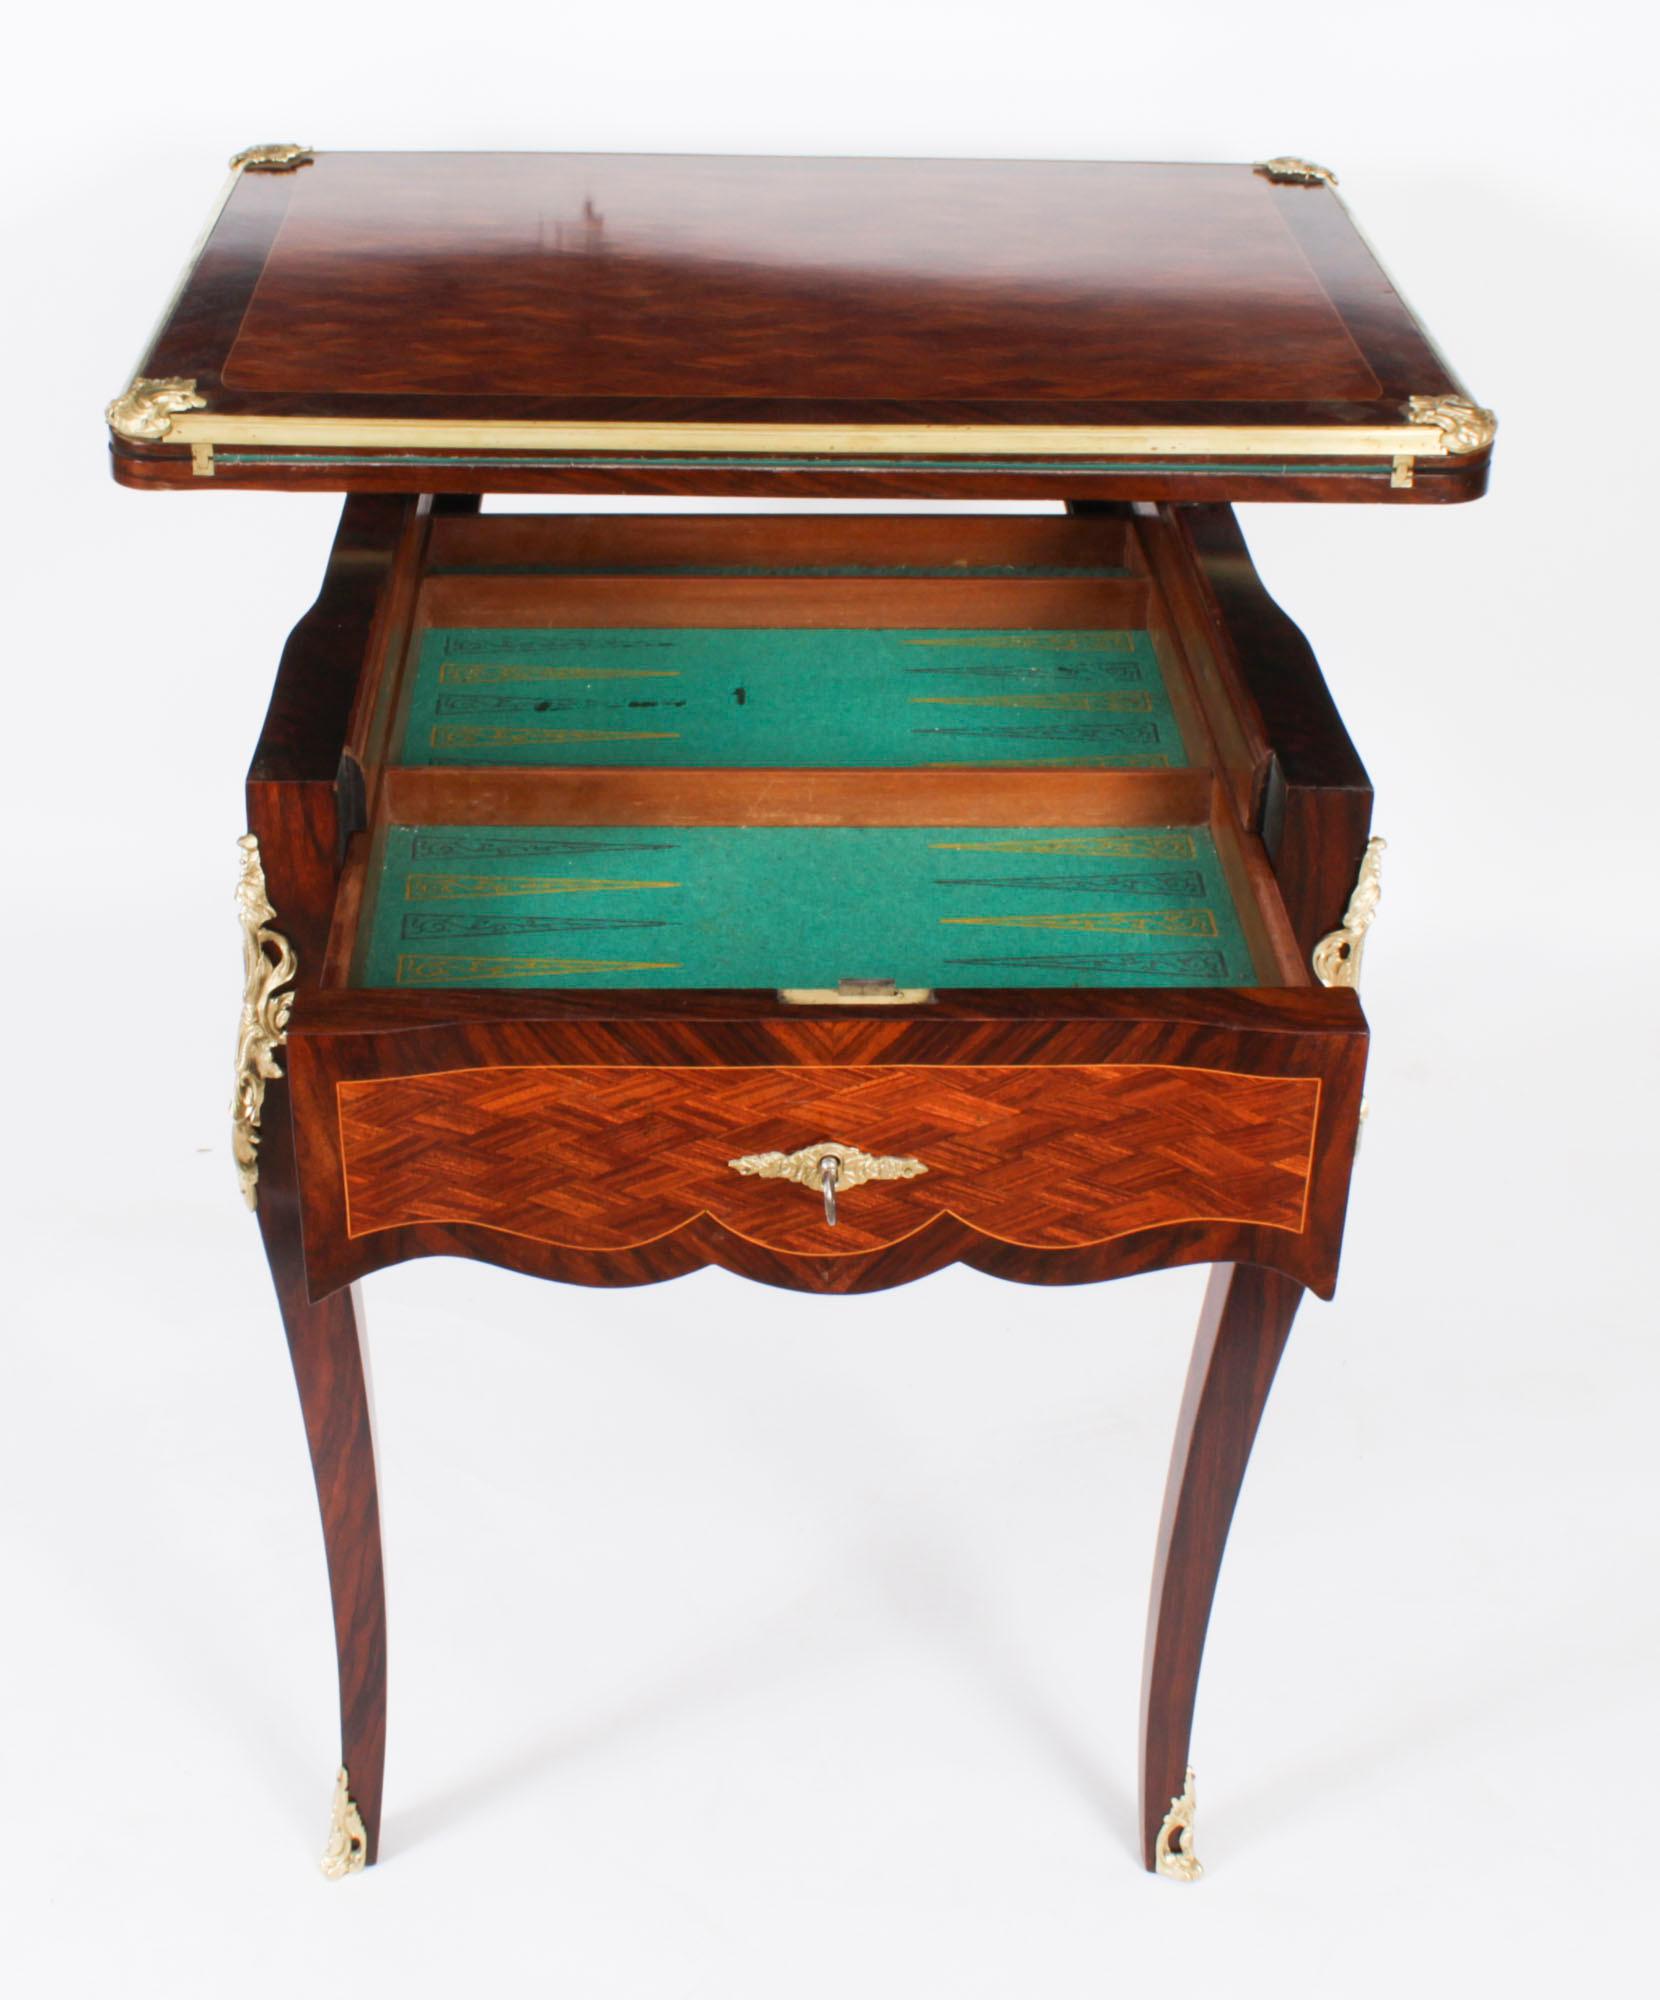 Antique French Burr Walnut Parquetry Card Backgammon Table 19th Century For Sale 9